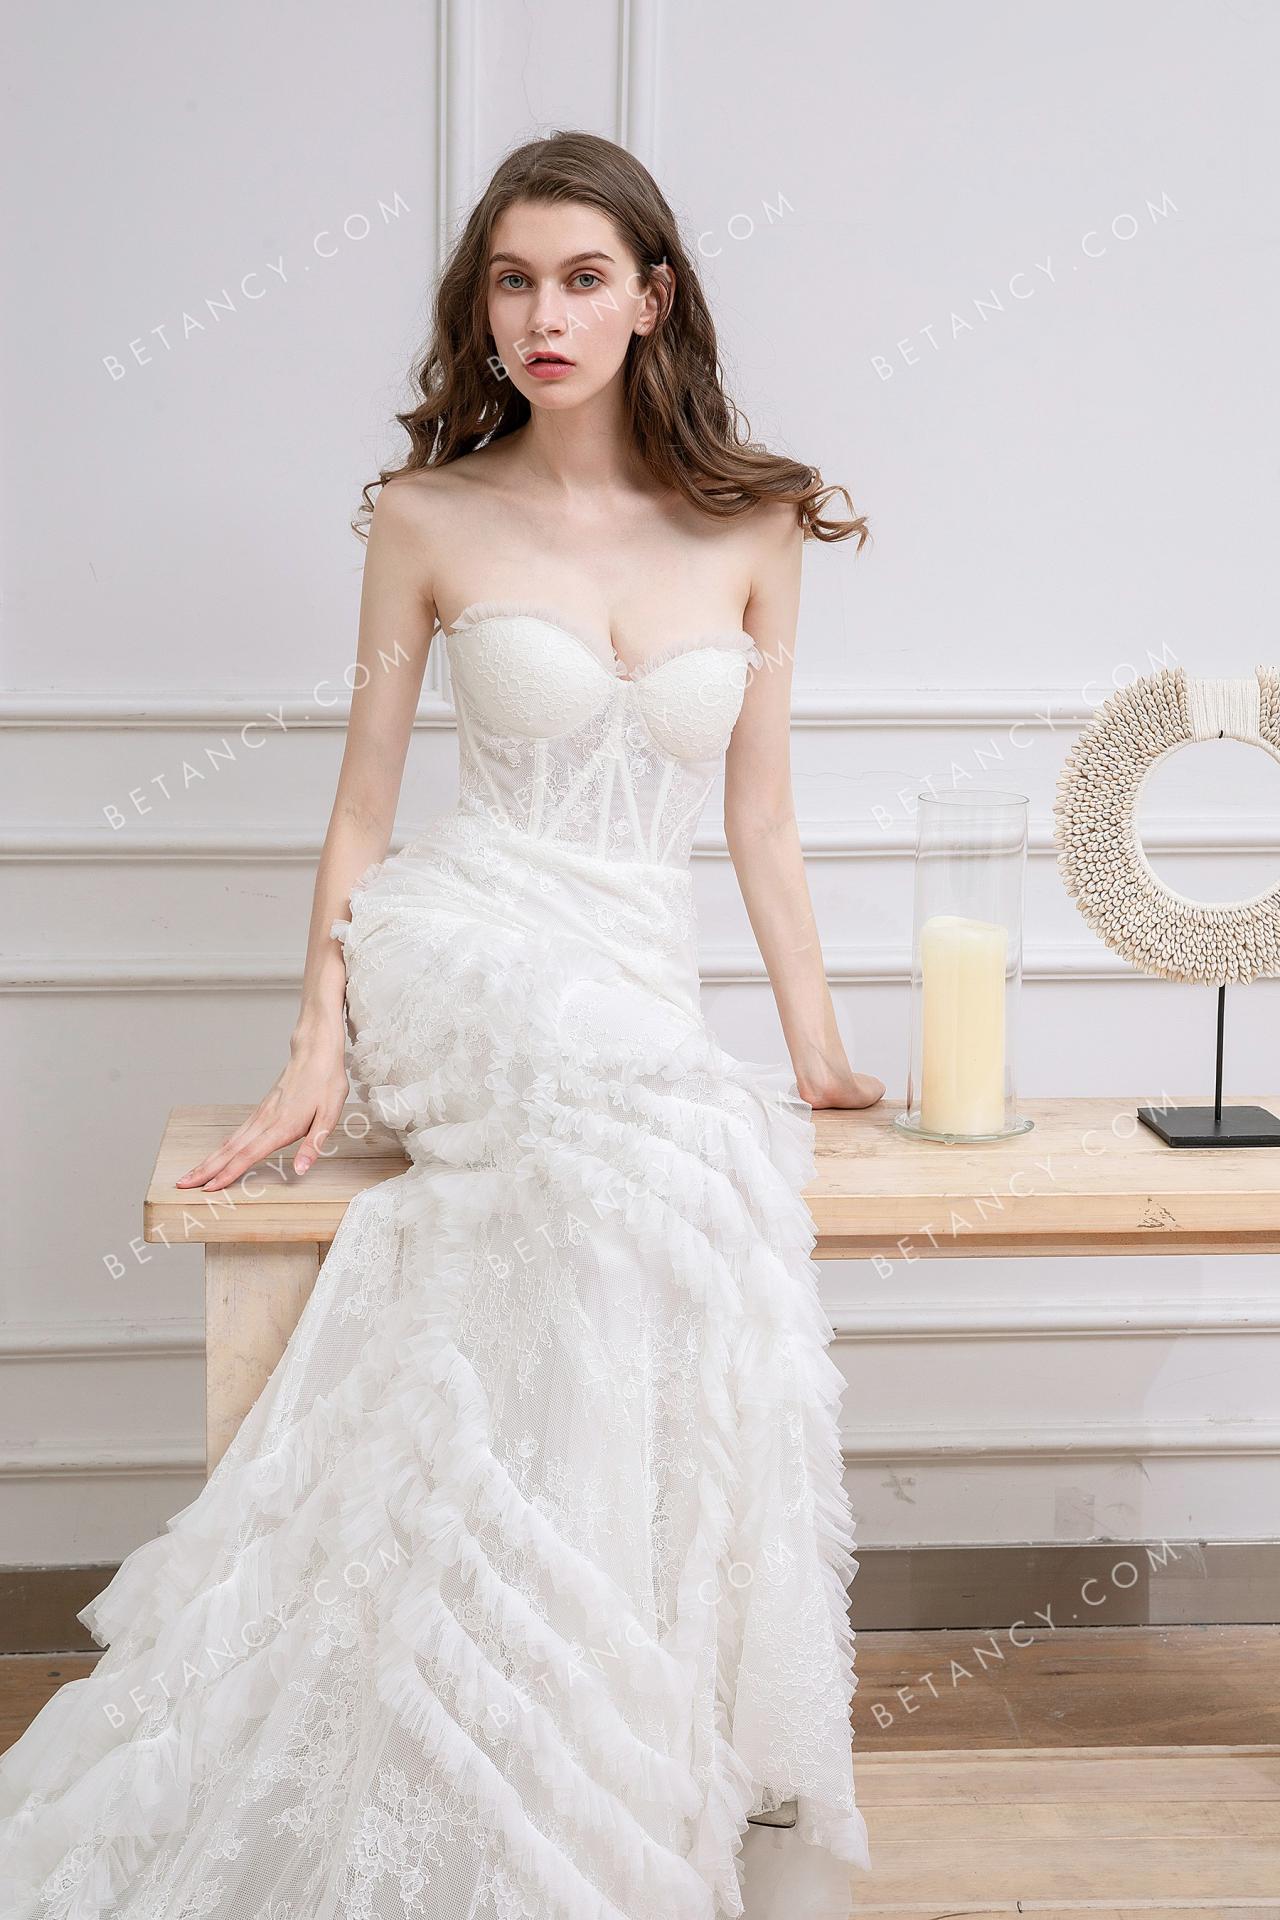 Strapless sweetheart illusion lace and tulle bridal dress 2